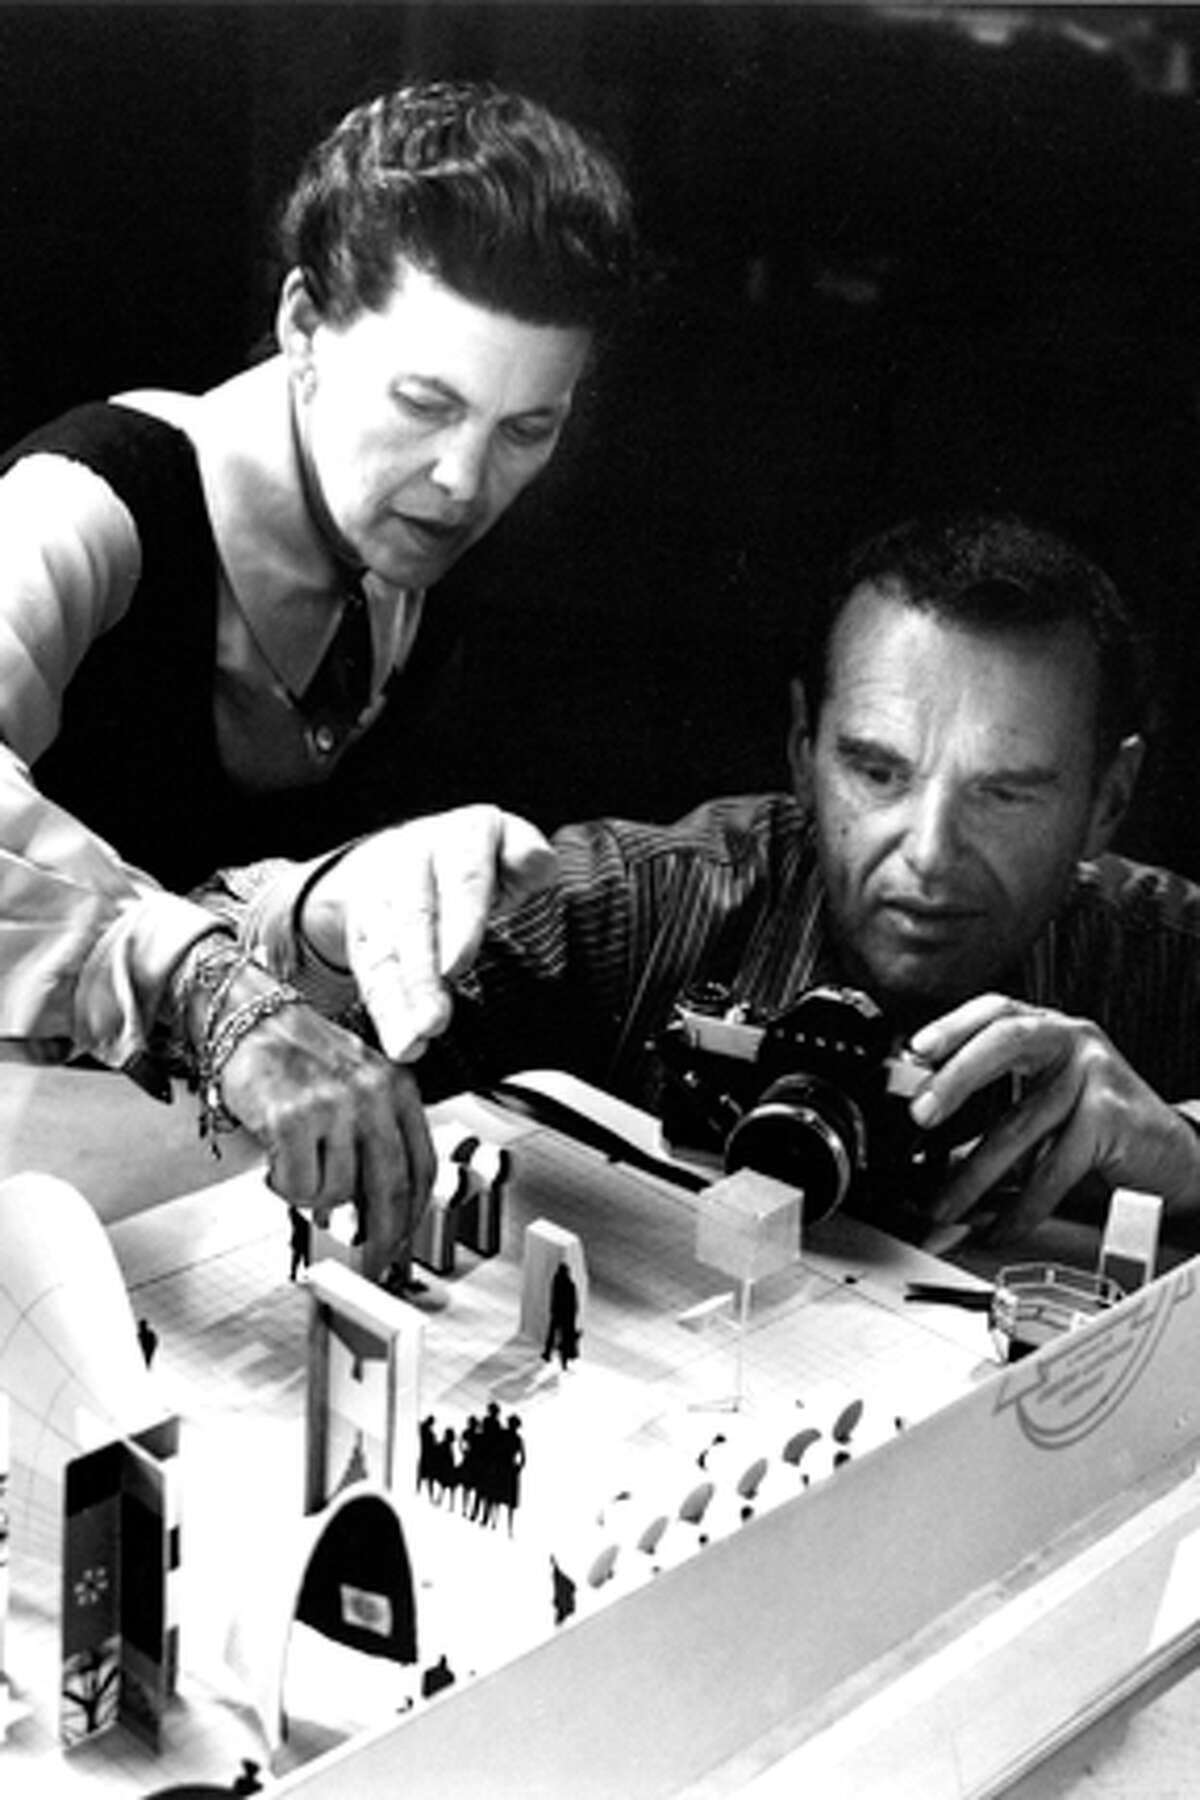 Ray Eames and Charles Eames as seen in "Eames: The Architect and the Painter."